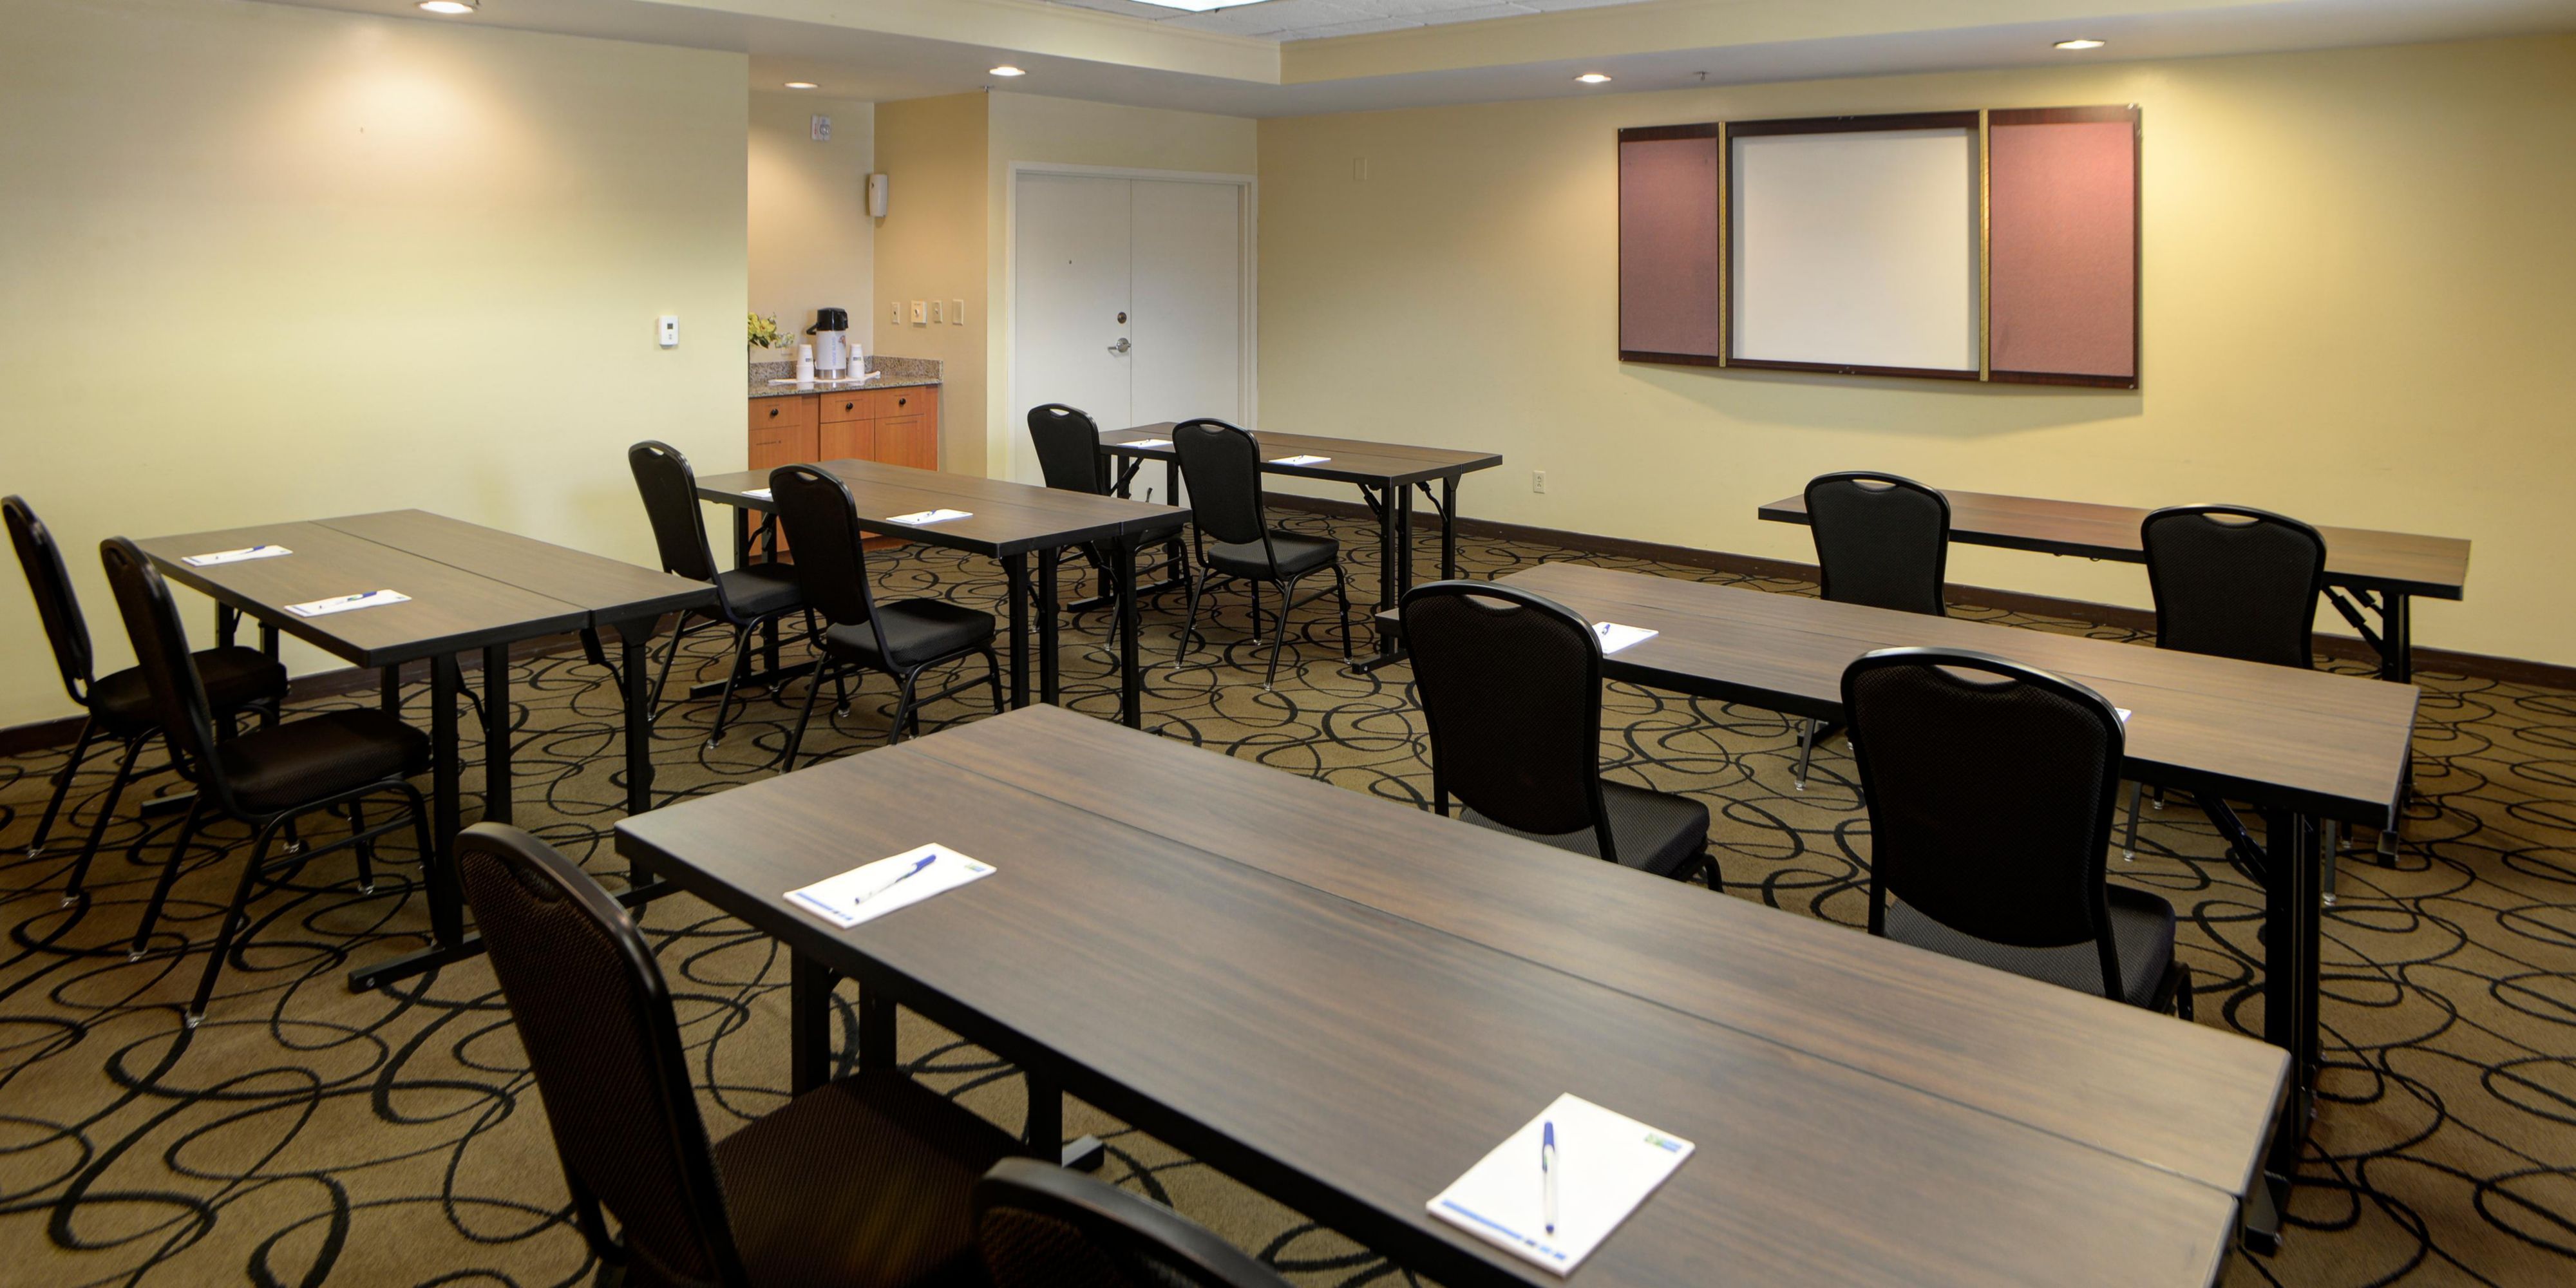 Looking for a place to hold your next business meeting or small get together? Our Indianapolis hotel's 552-square-feet meeting room can seat up to 30 guests for a lecture or a sales presentation. Audio/visual equipment is provided for a small fee.